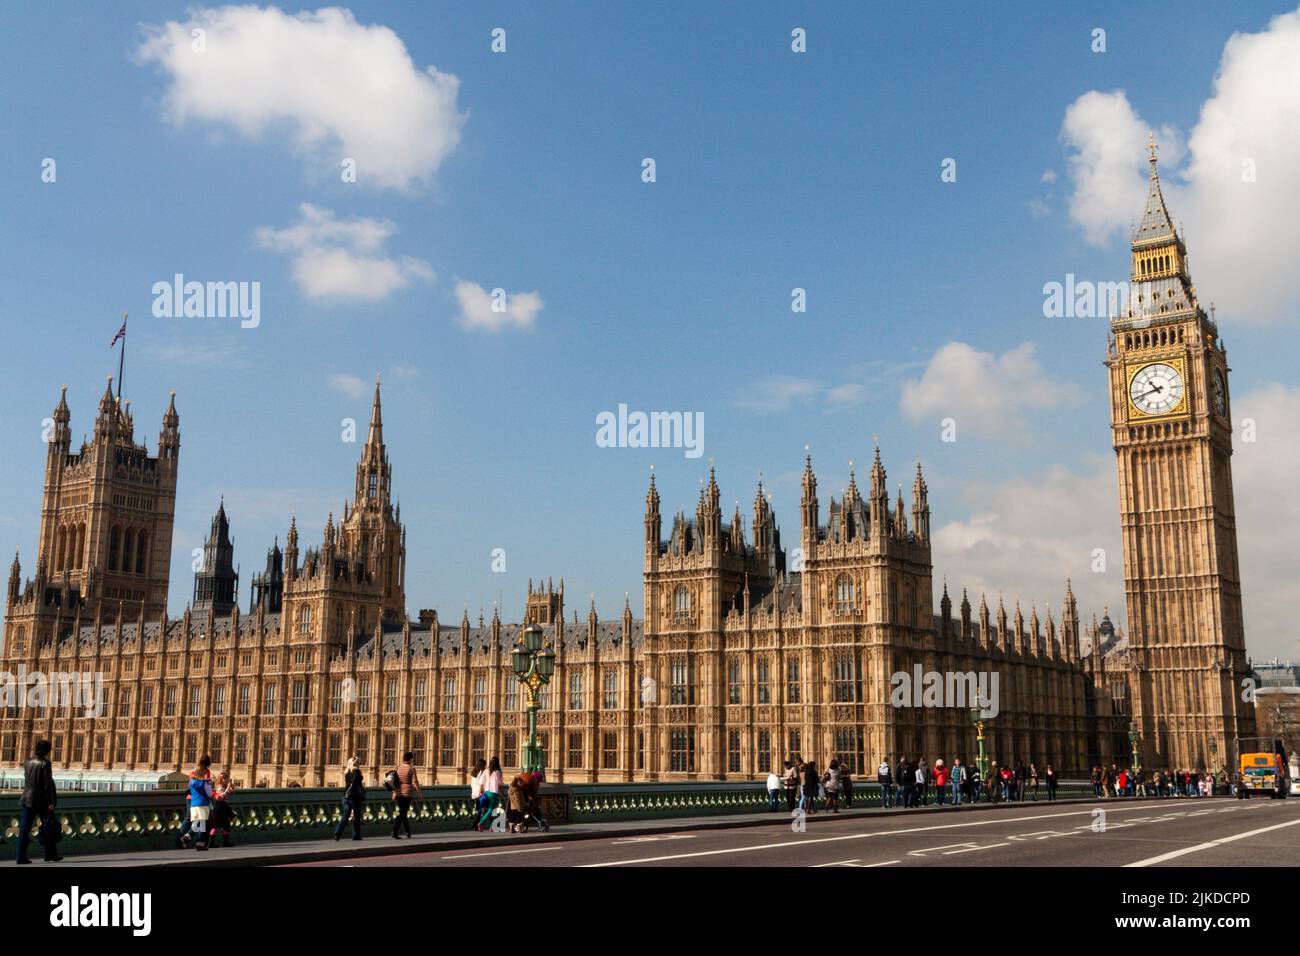 London, England - Aril 3, 2012: The Palace of Westminster (Houses of Parliament) in London ,England. The Palace serves as the meeting place for both Stock Photo